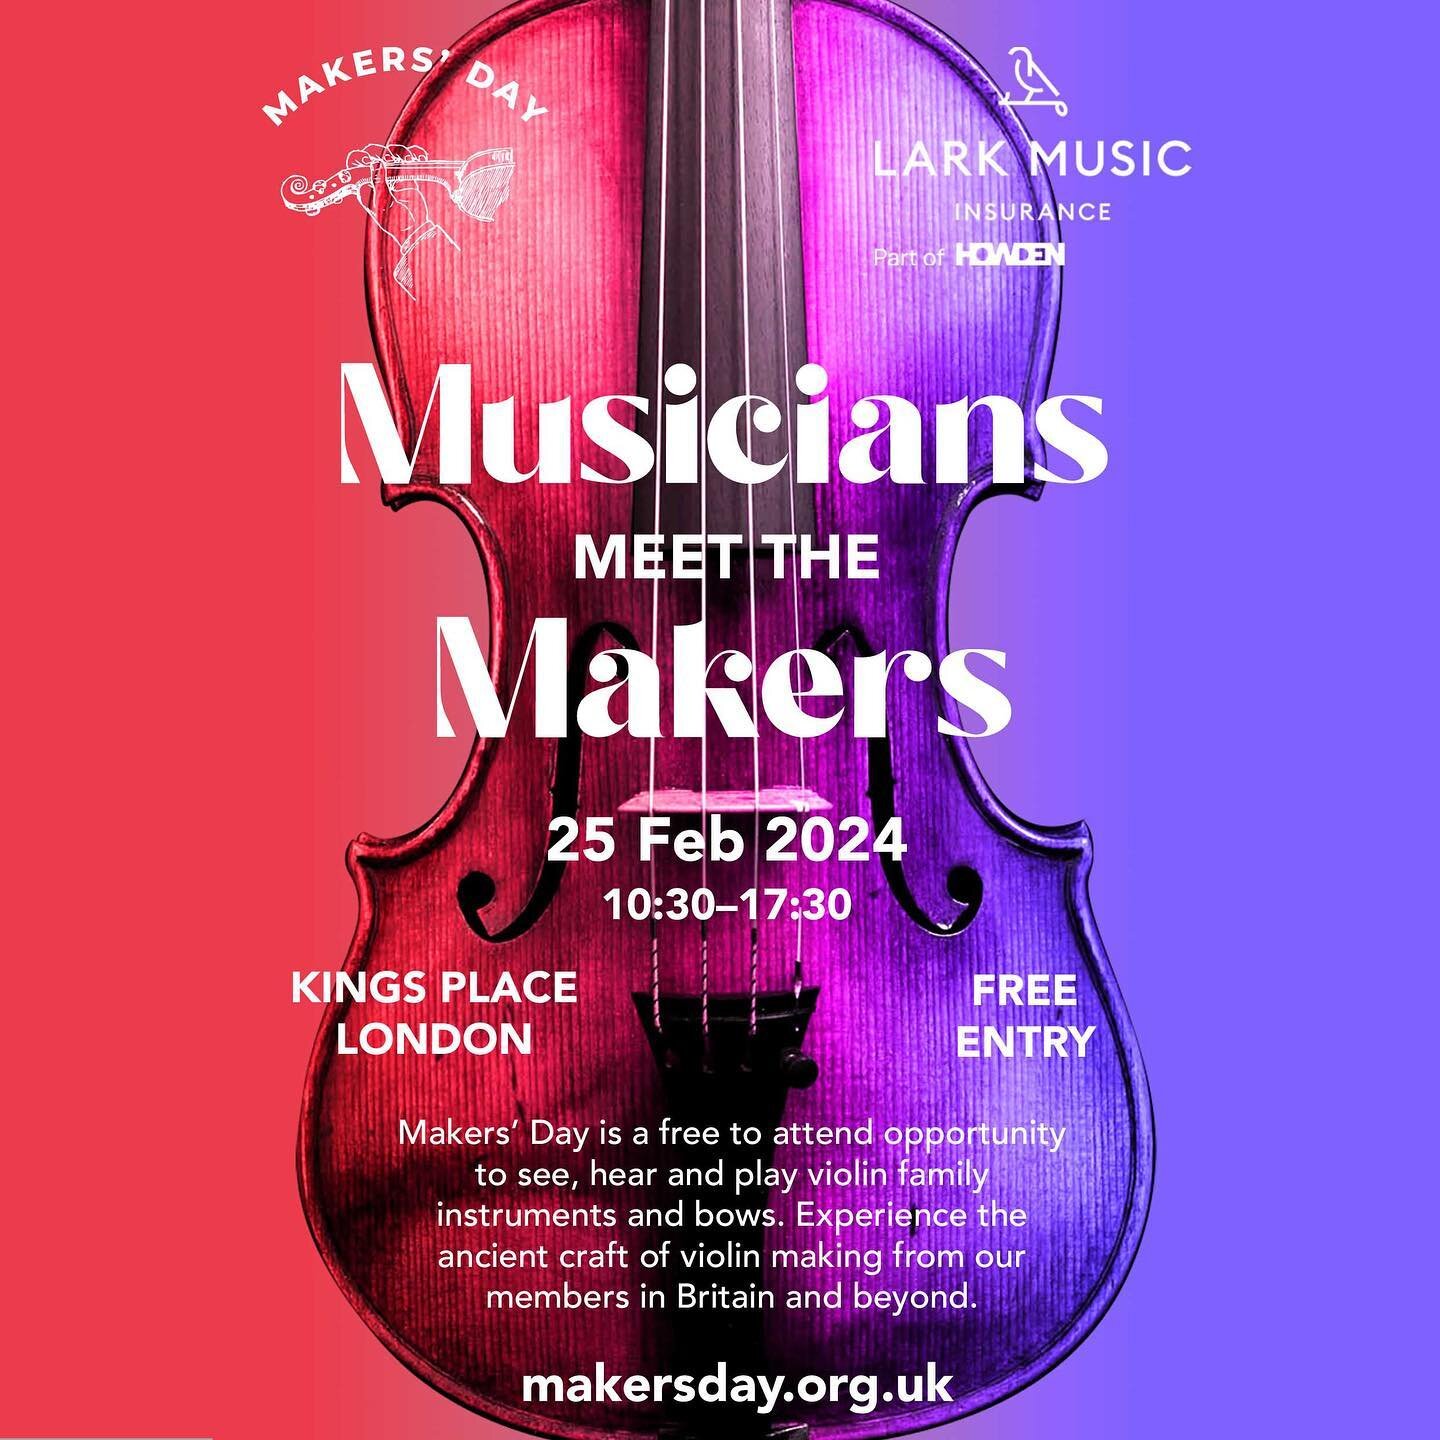 Very excited to be making my appearance at Makers&rsquo; Day this year for the first time as an exhibitor rather than event co-ordinator! 

I&rsquo;ve been involved as an event co-ordinator of Makers&rsquo; Day for the past 5 years, and whilst I&rsqu